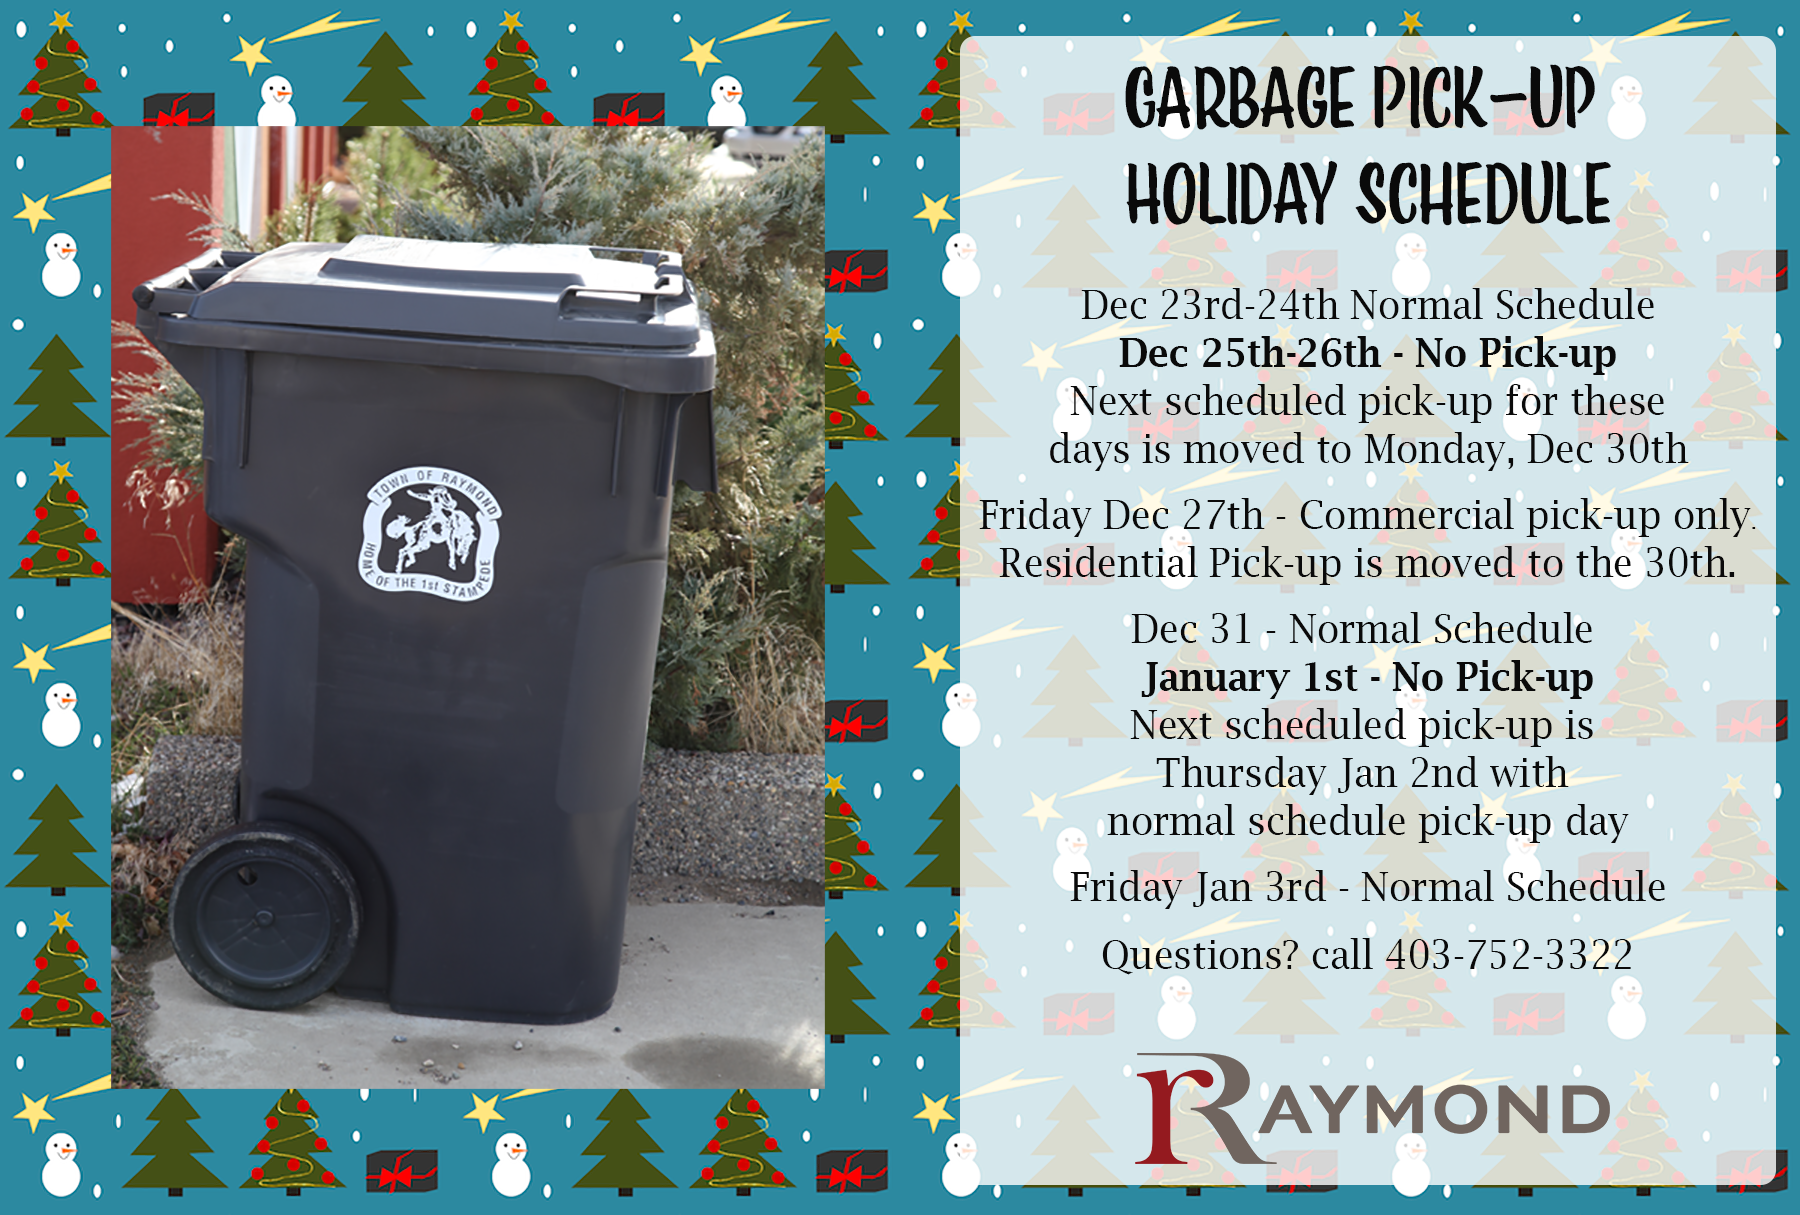 Garbage Pickup Holiday Schedule Town of Raymond